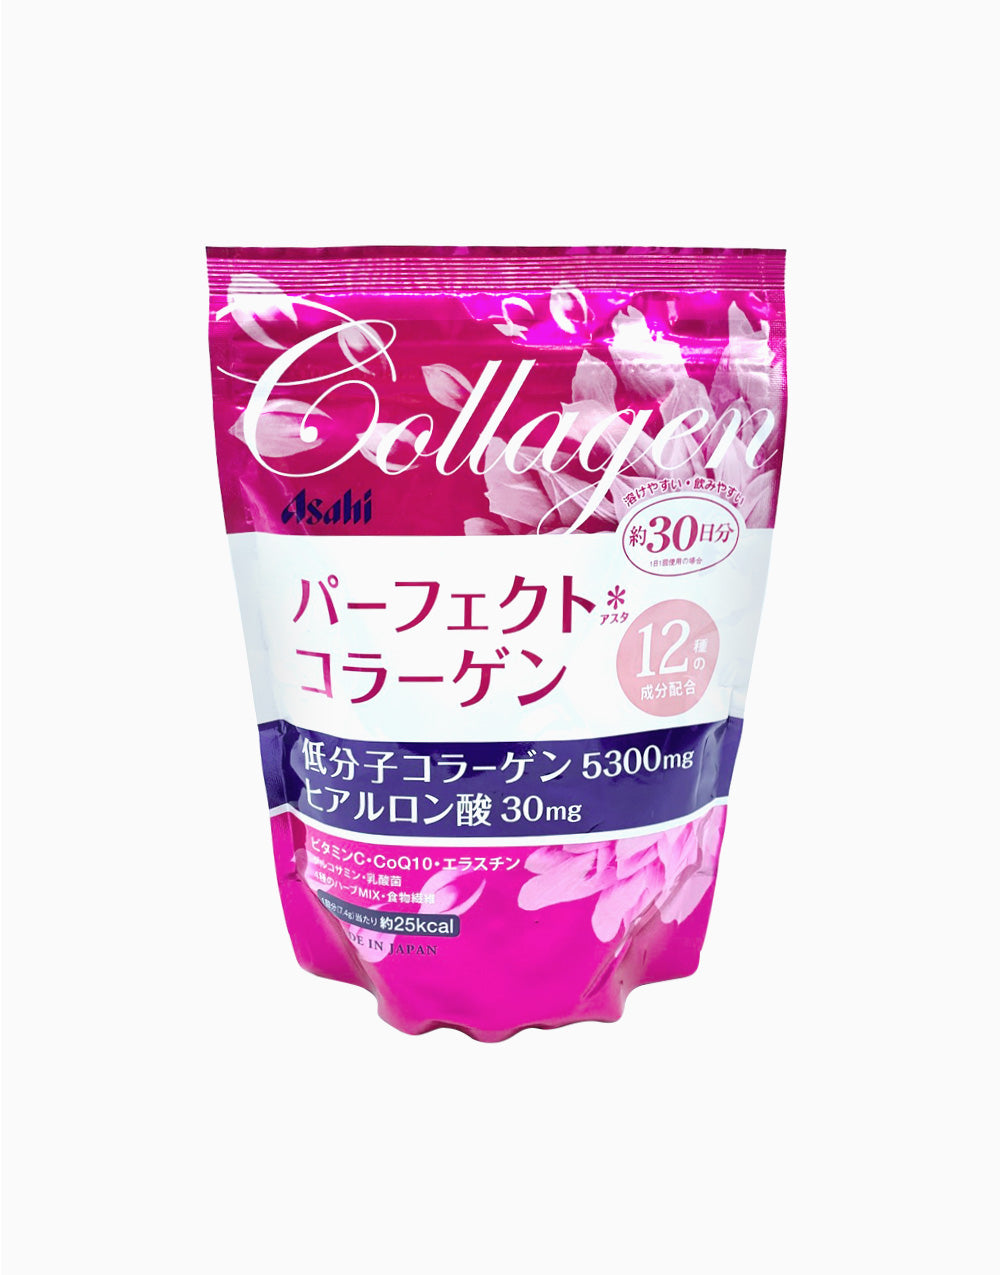 ASAHI DEAR NATURA Perfect Asta Collagen with Hyaluronic, CoQ10, Vit C, and Fiber (5,300mg - 30 Days)